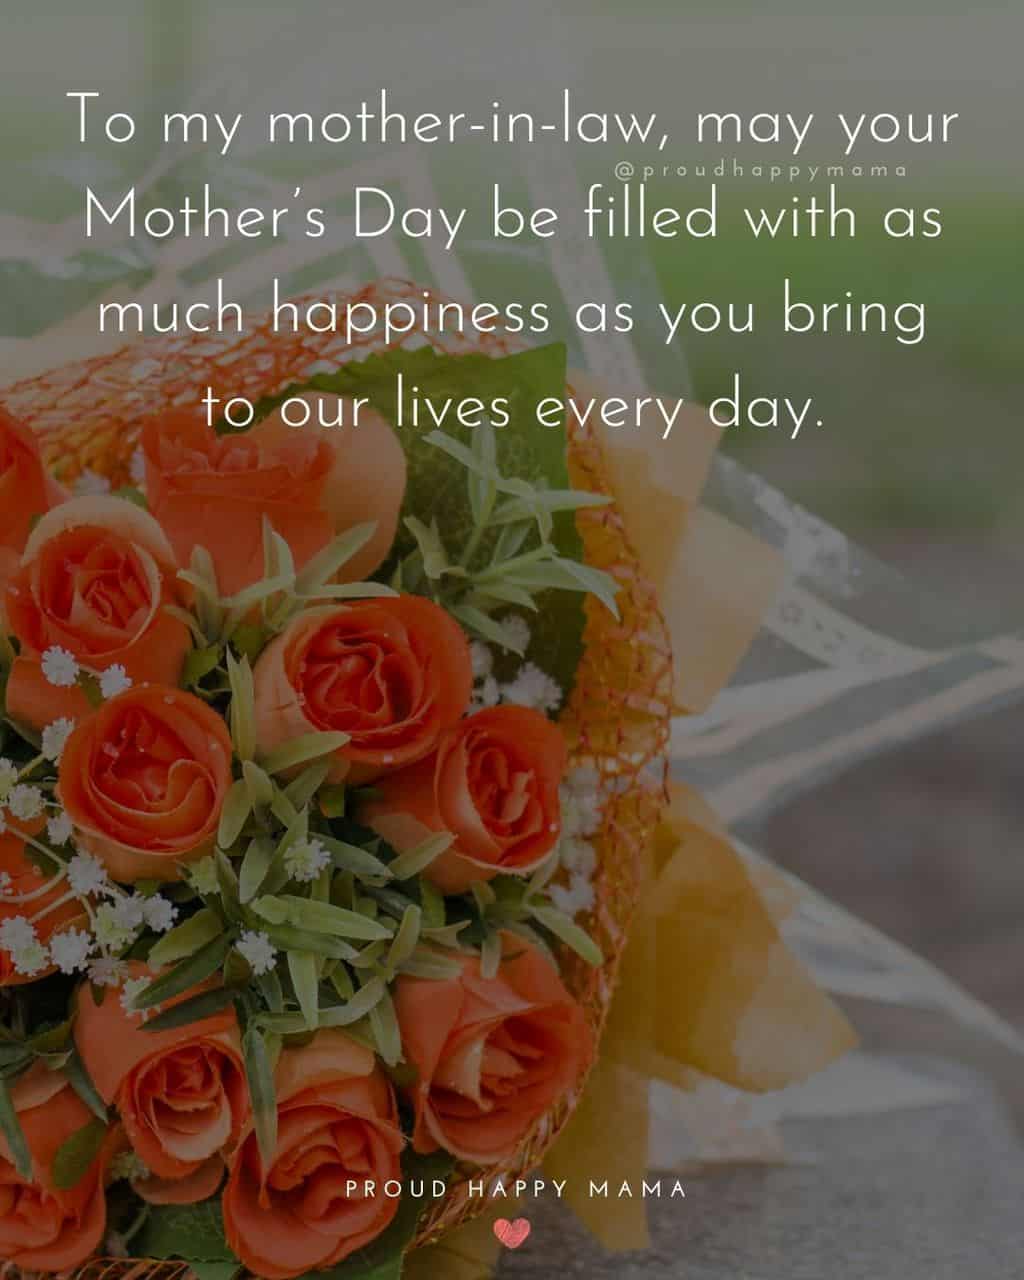 Happy Mothers Day Quotes For Mother In Law - To my mother in law, may your Mother’s Day be filled with as much happiness as you bring